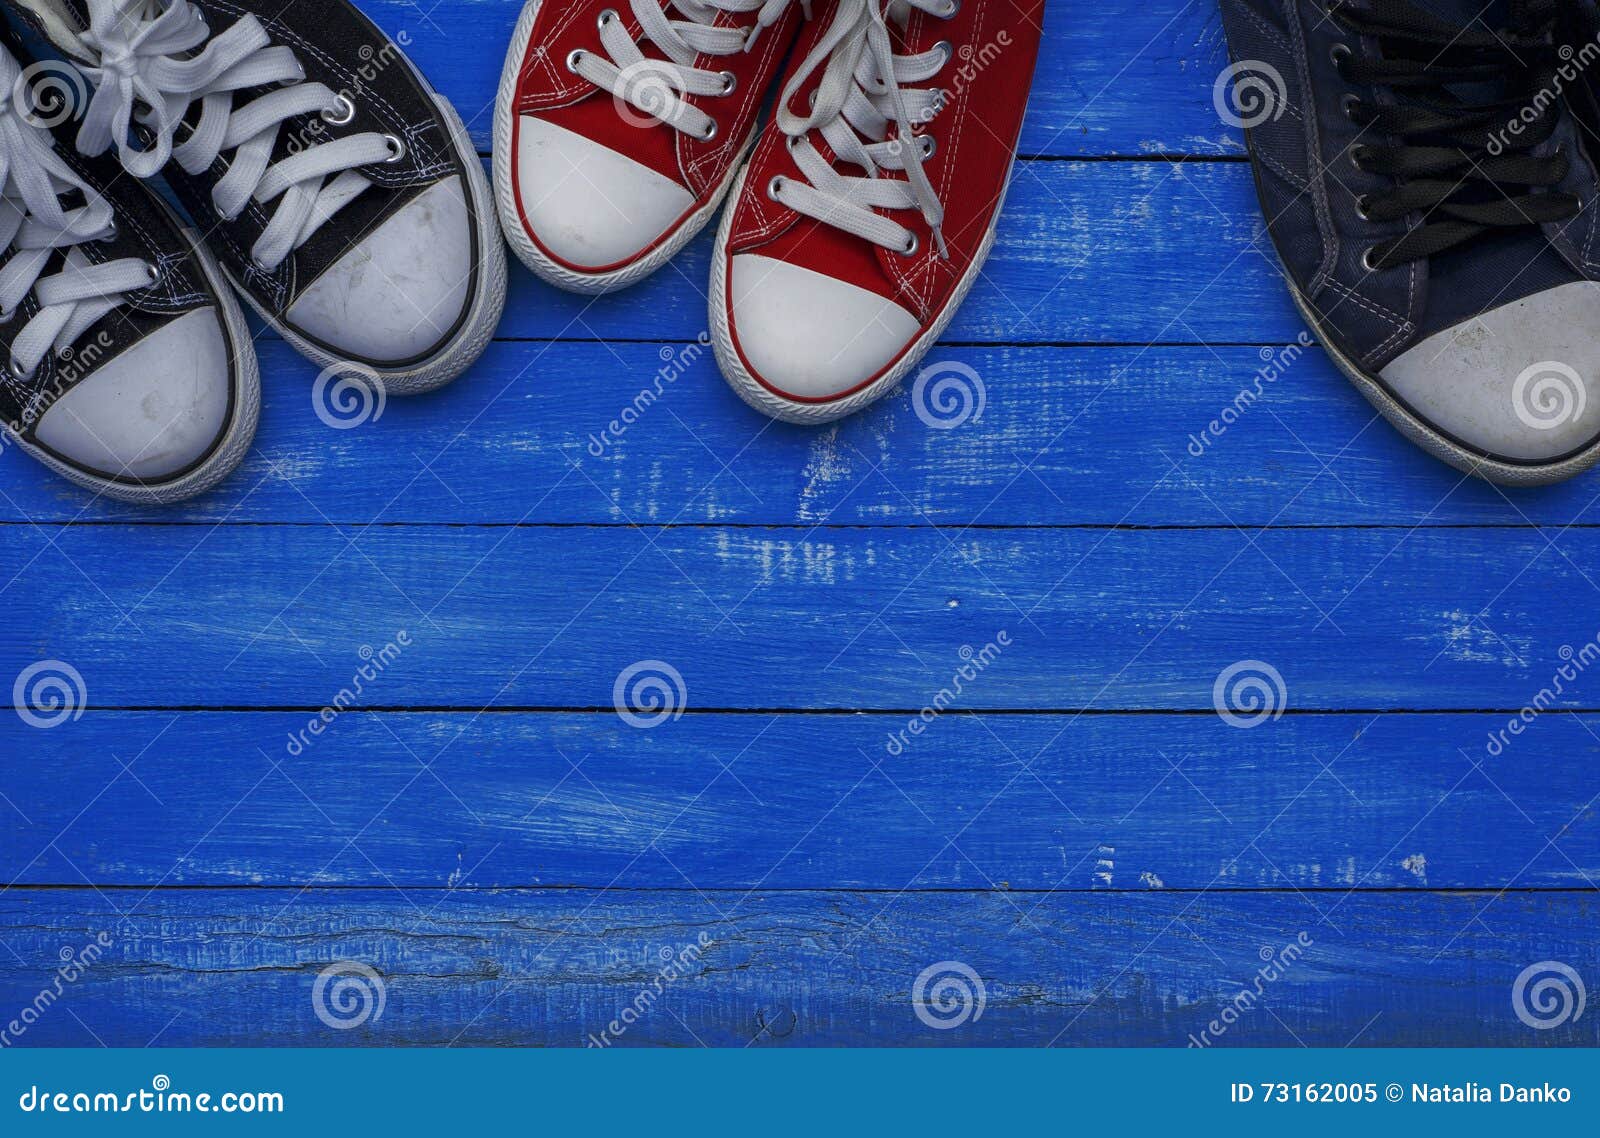 Three Pairs of Sneakers of Different Sizes Stock Image - Image of retro ...